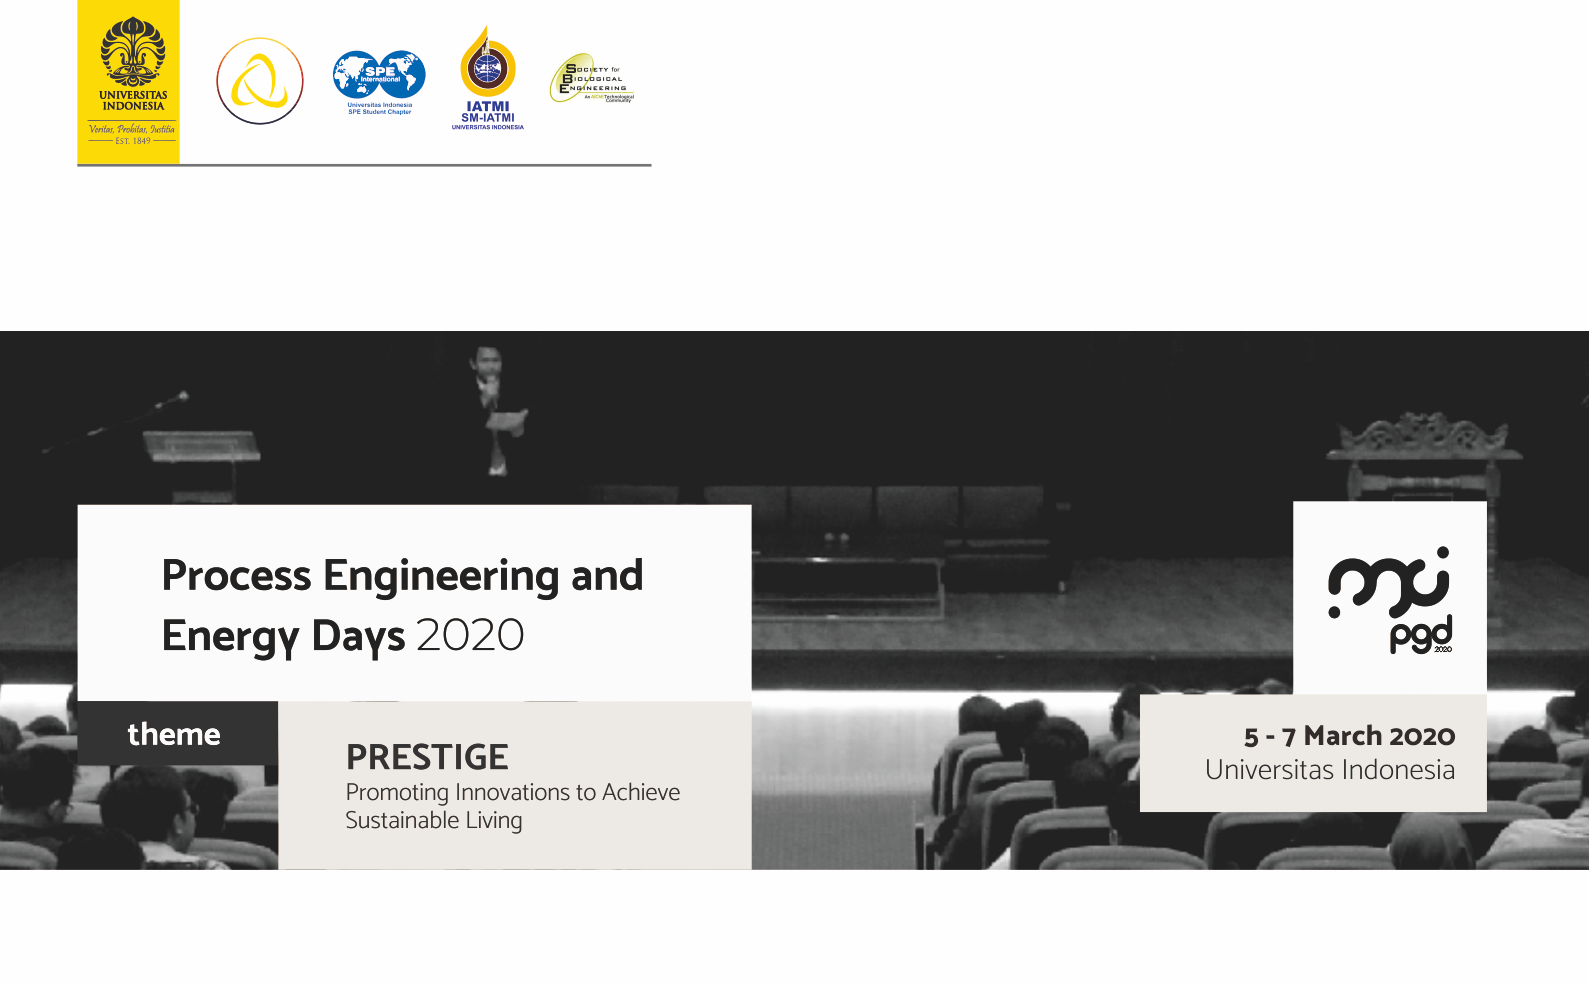 Process Engineering and Energy Days University of Indonesia (PGD UI) 2020 Competitions ($7,000 prize)